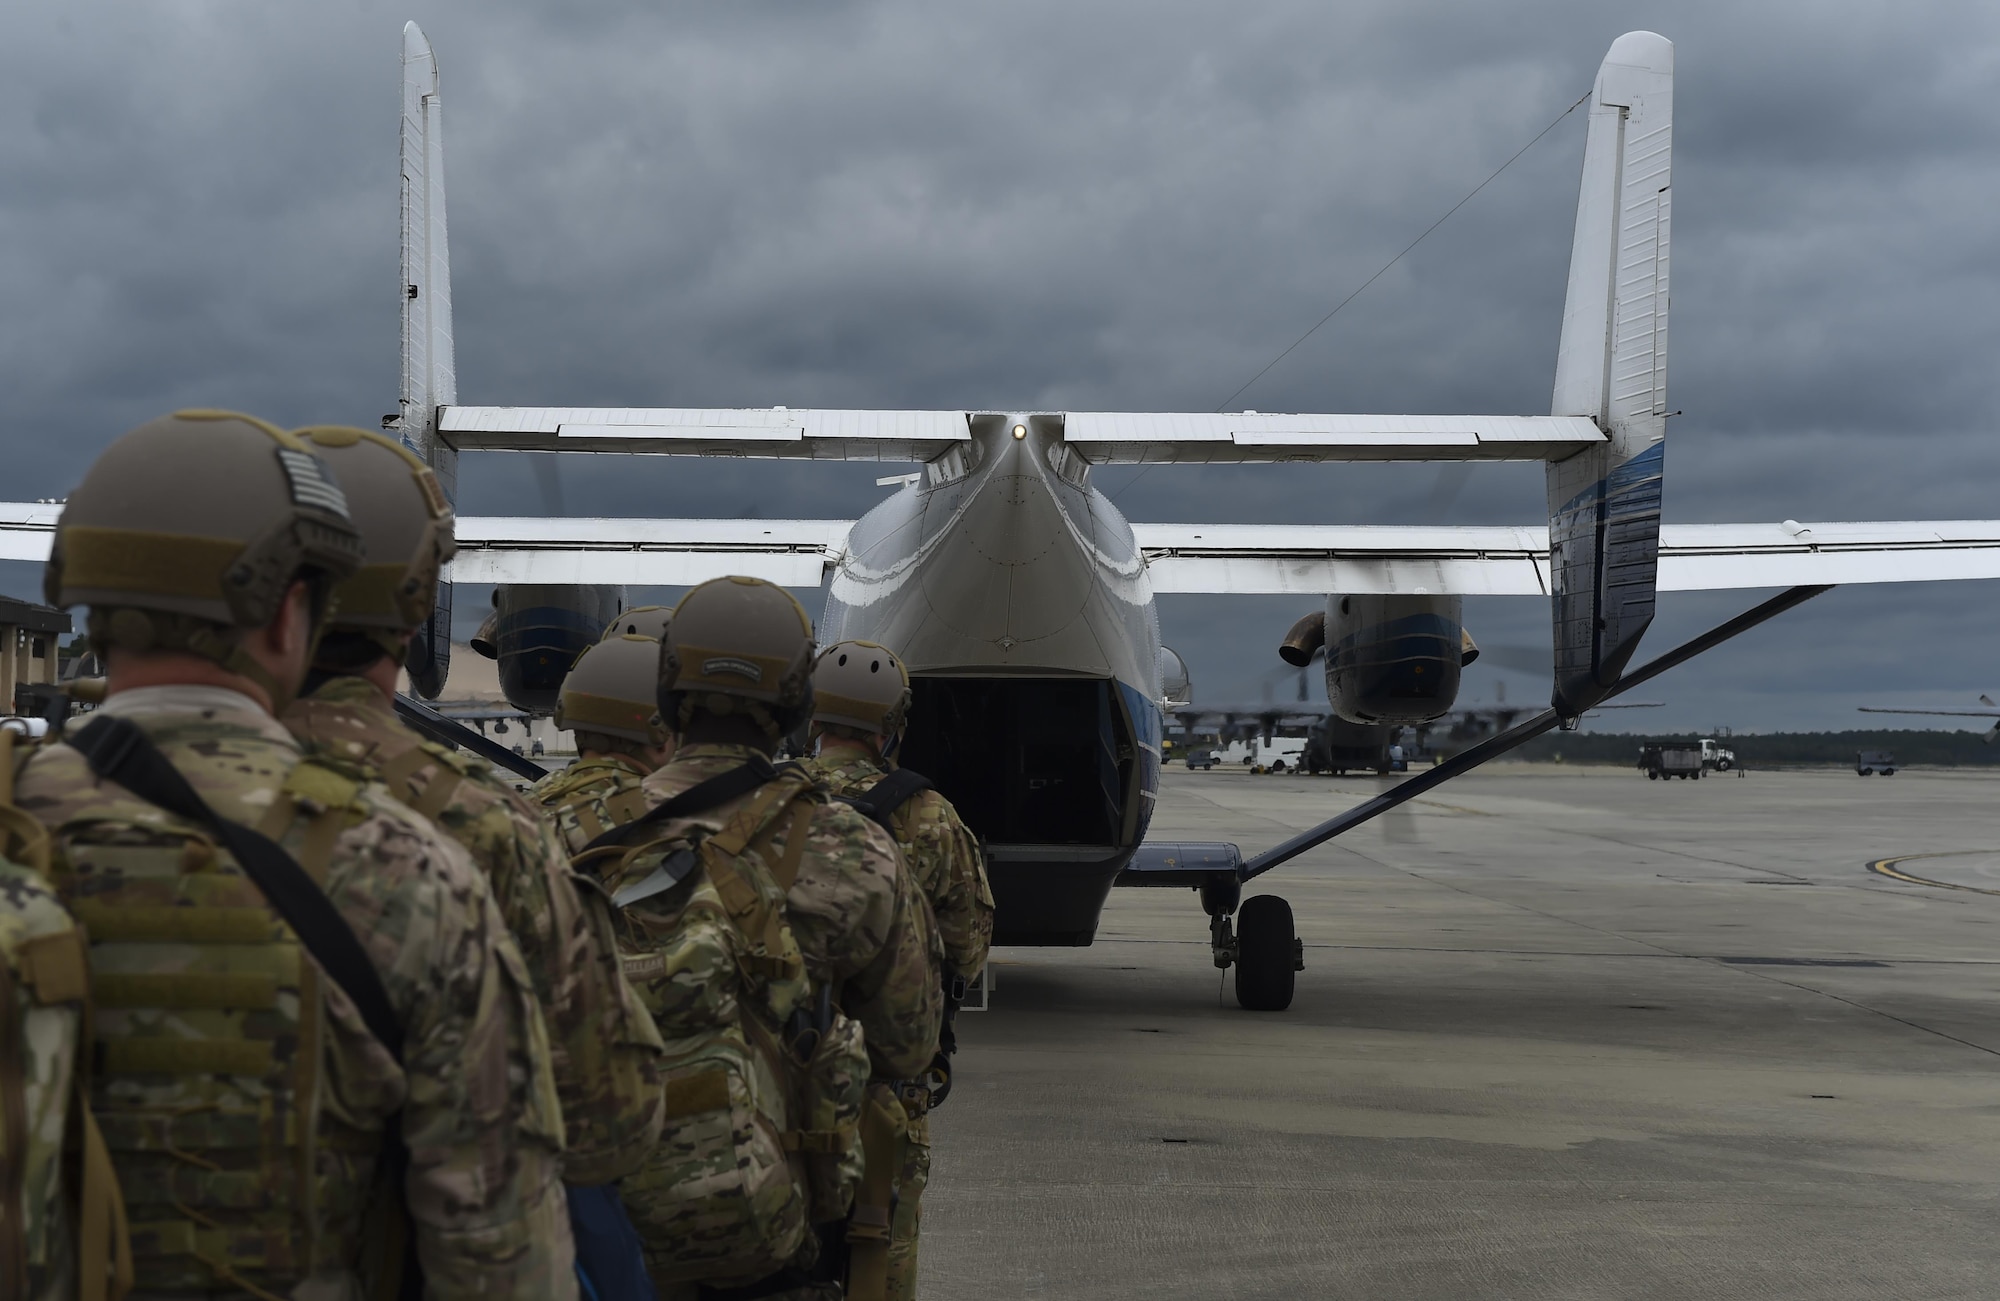 Combat aviation advisor students with the 6th Special Operations Squadron load onto a C-145A Skytruck during Operation Raven Claw at Hurlburt Field, Fla., April 24, 2017. Raven Claw is the capstone event for the Air Force Special Operations Training Center’s combat aviation advisor mission qualification course. (U.S. Air Force photo by Airman 1st Class Joseph Pick)